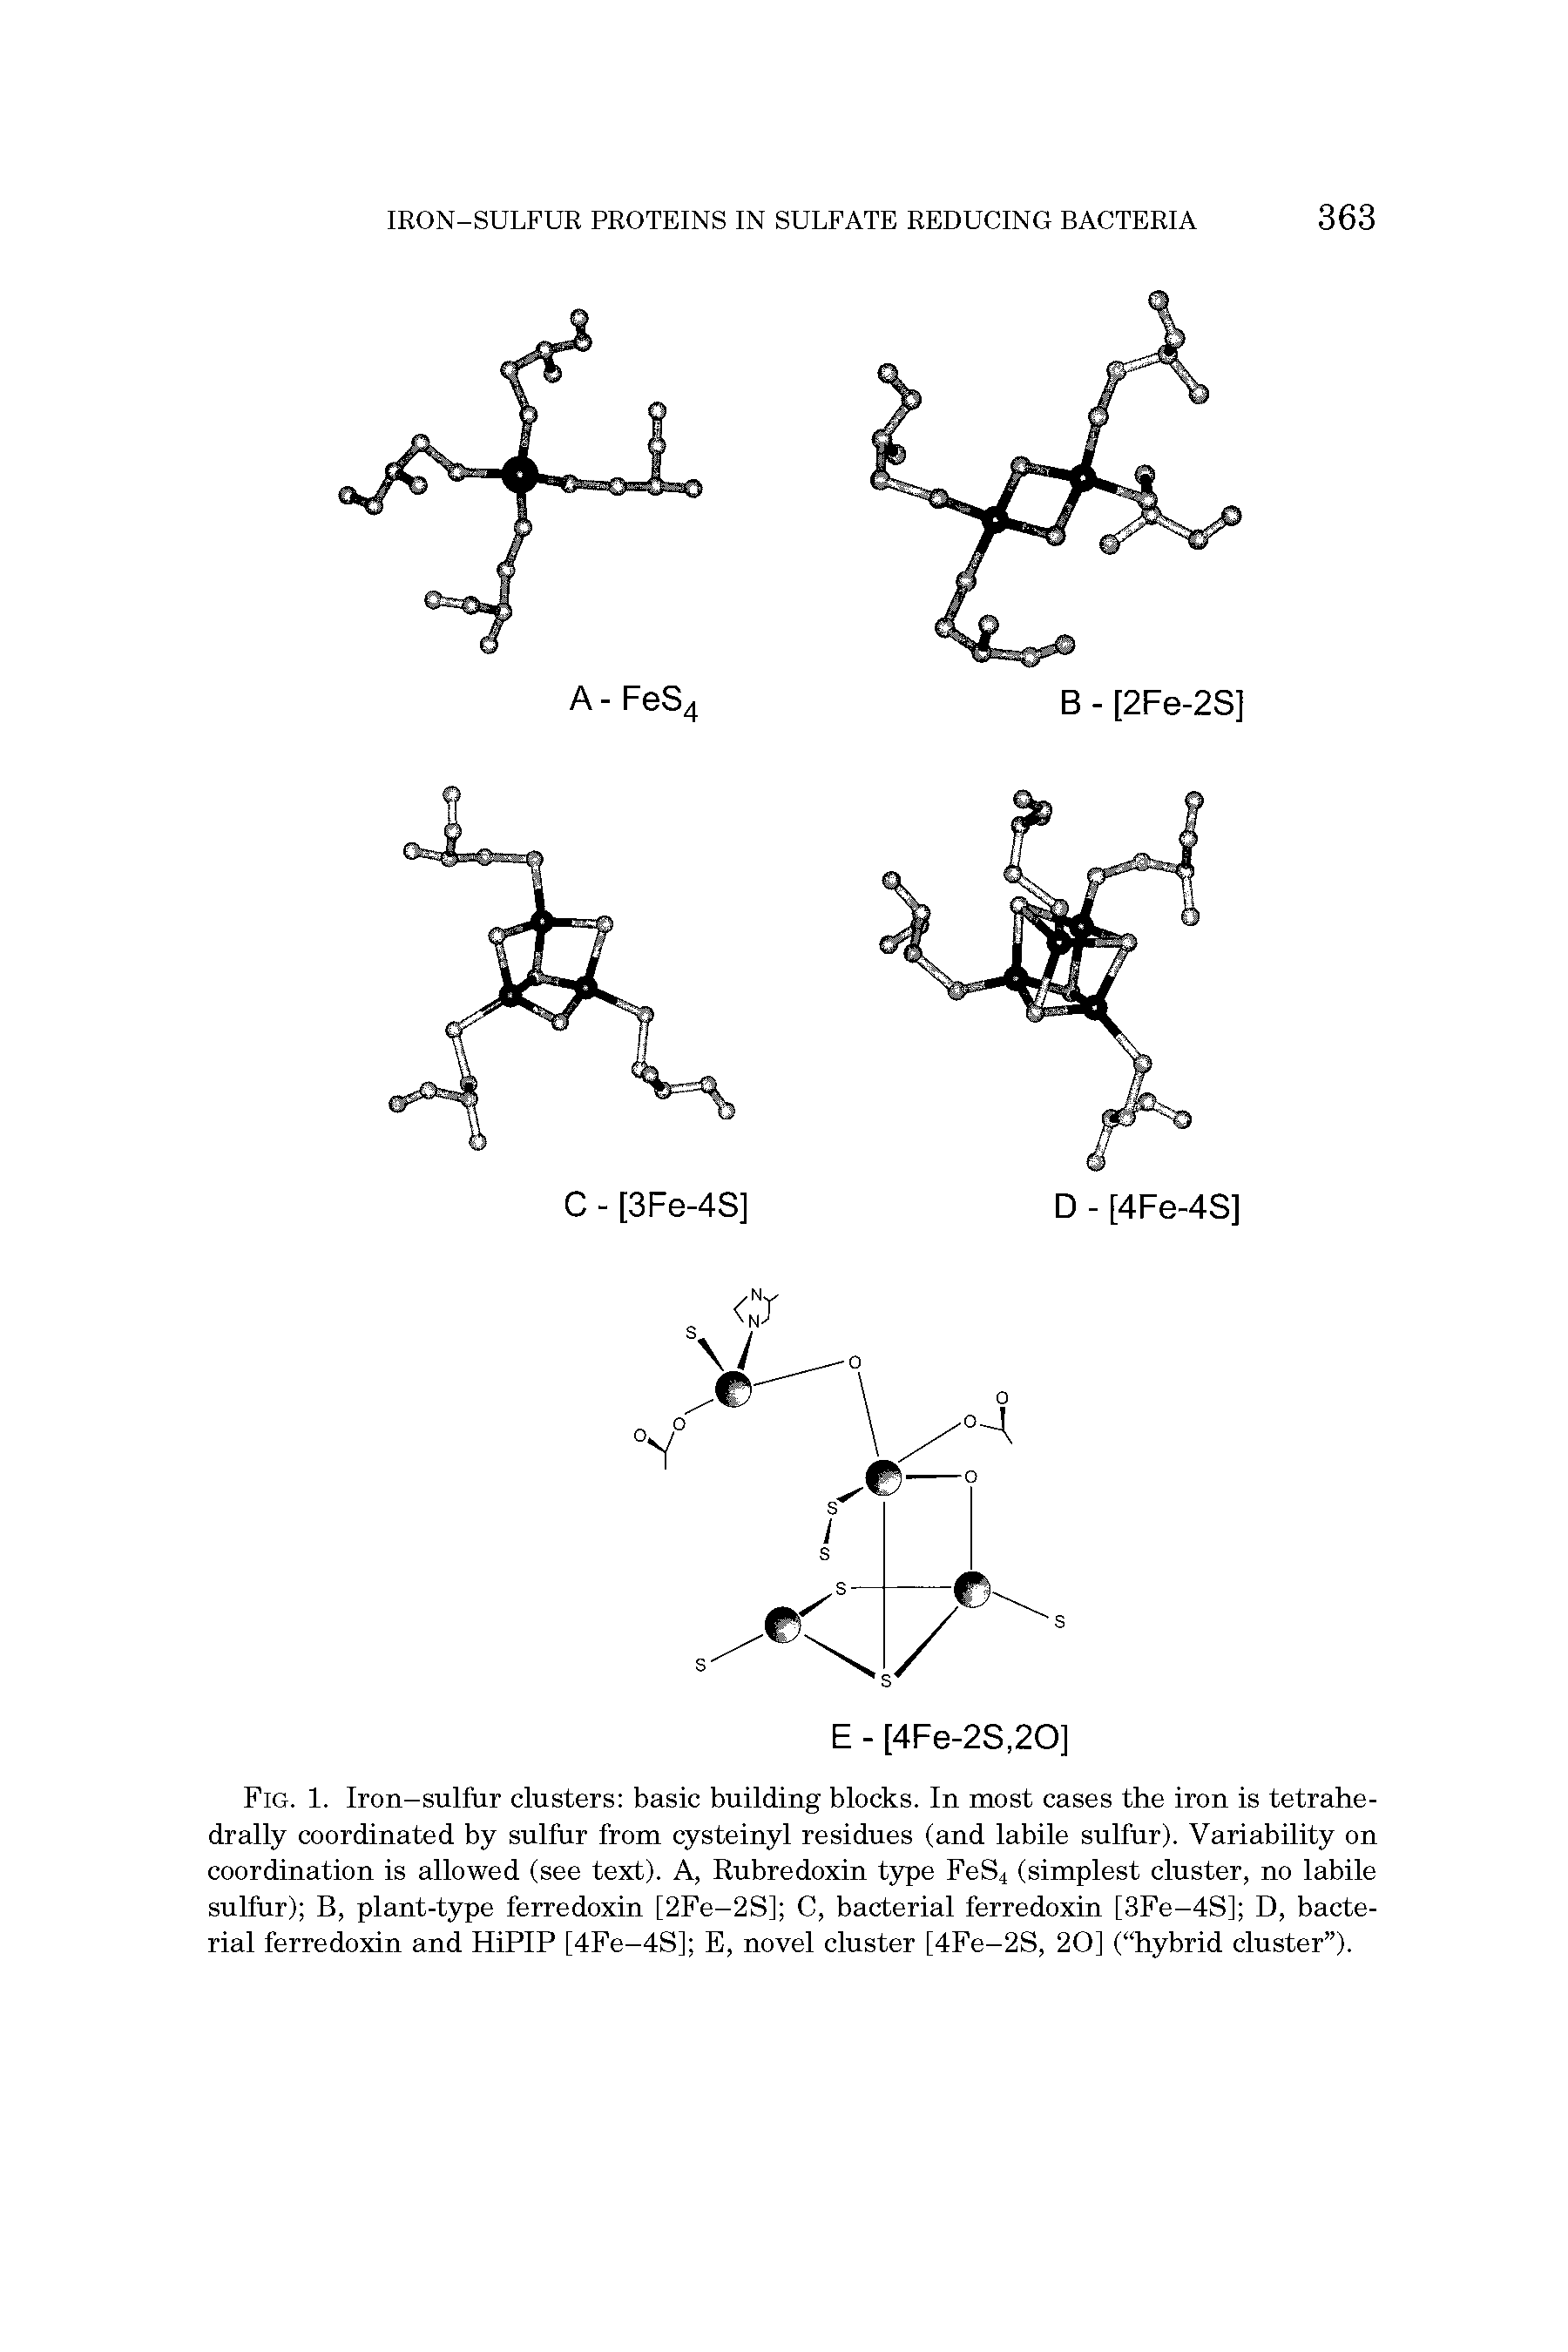 Fig. 1. Iron-sulfur clusters basic building blocks. In most cases the iron is tetrahe-drally coordinated by sulfur from cysteinyl residues (and labile sulfur). Variability on coordination is allowed (see text). A, Rubredoxin type FeS4 (simplest cluster, no labile sulfur) B, plant-type ferredoxin [2Fe-2S] C, bacterial ferredoxin [3Fe-4S] D, bacterial ferredoxin and HiPIP [4Fe-4S] E, novel cluster [4Fe-2S, 20] ( hybrid cluster ).